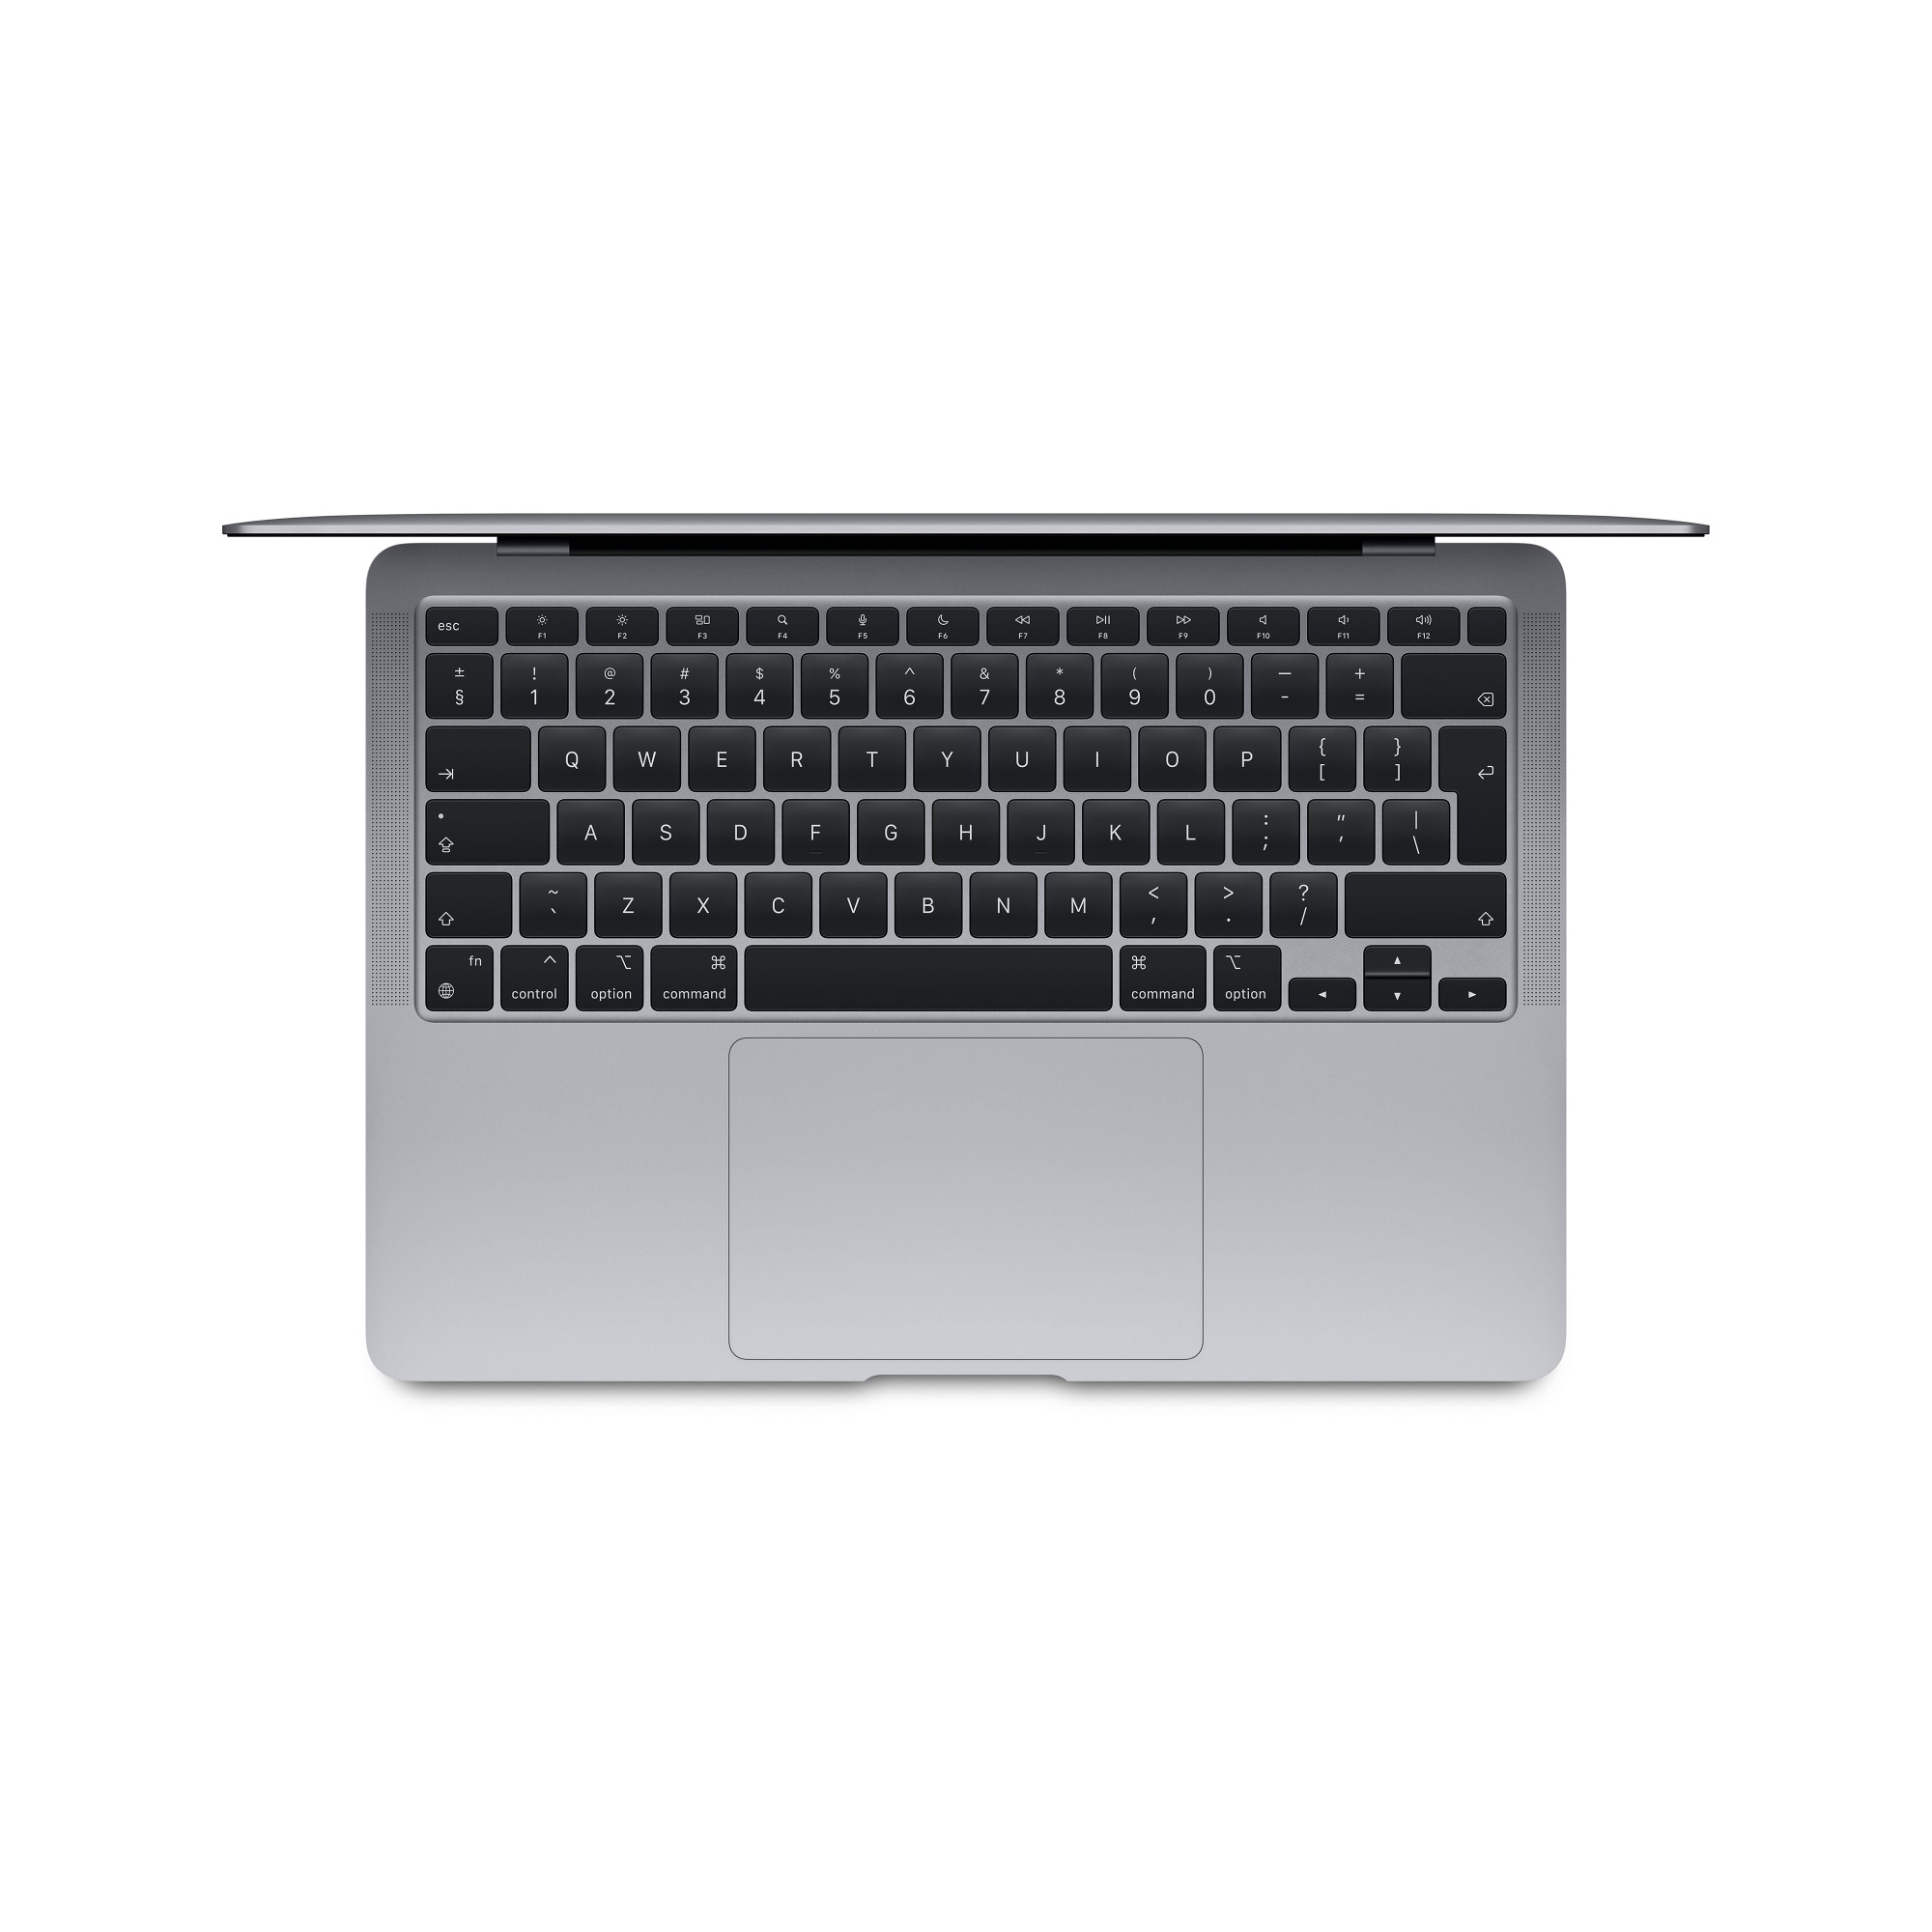 APPLE 13-inch MacBook Air: Apple M1 chip with 8-core CPU and 7-core GPU, 256GB - Space Grey